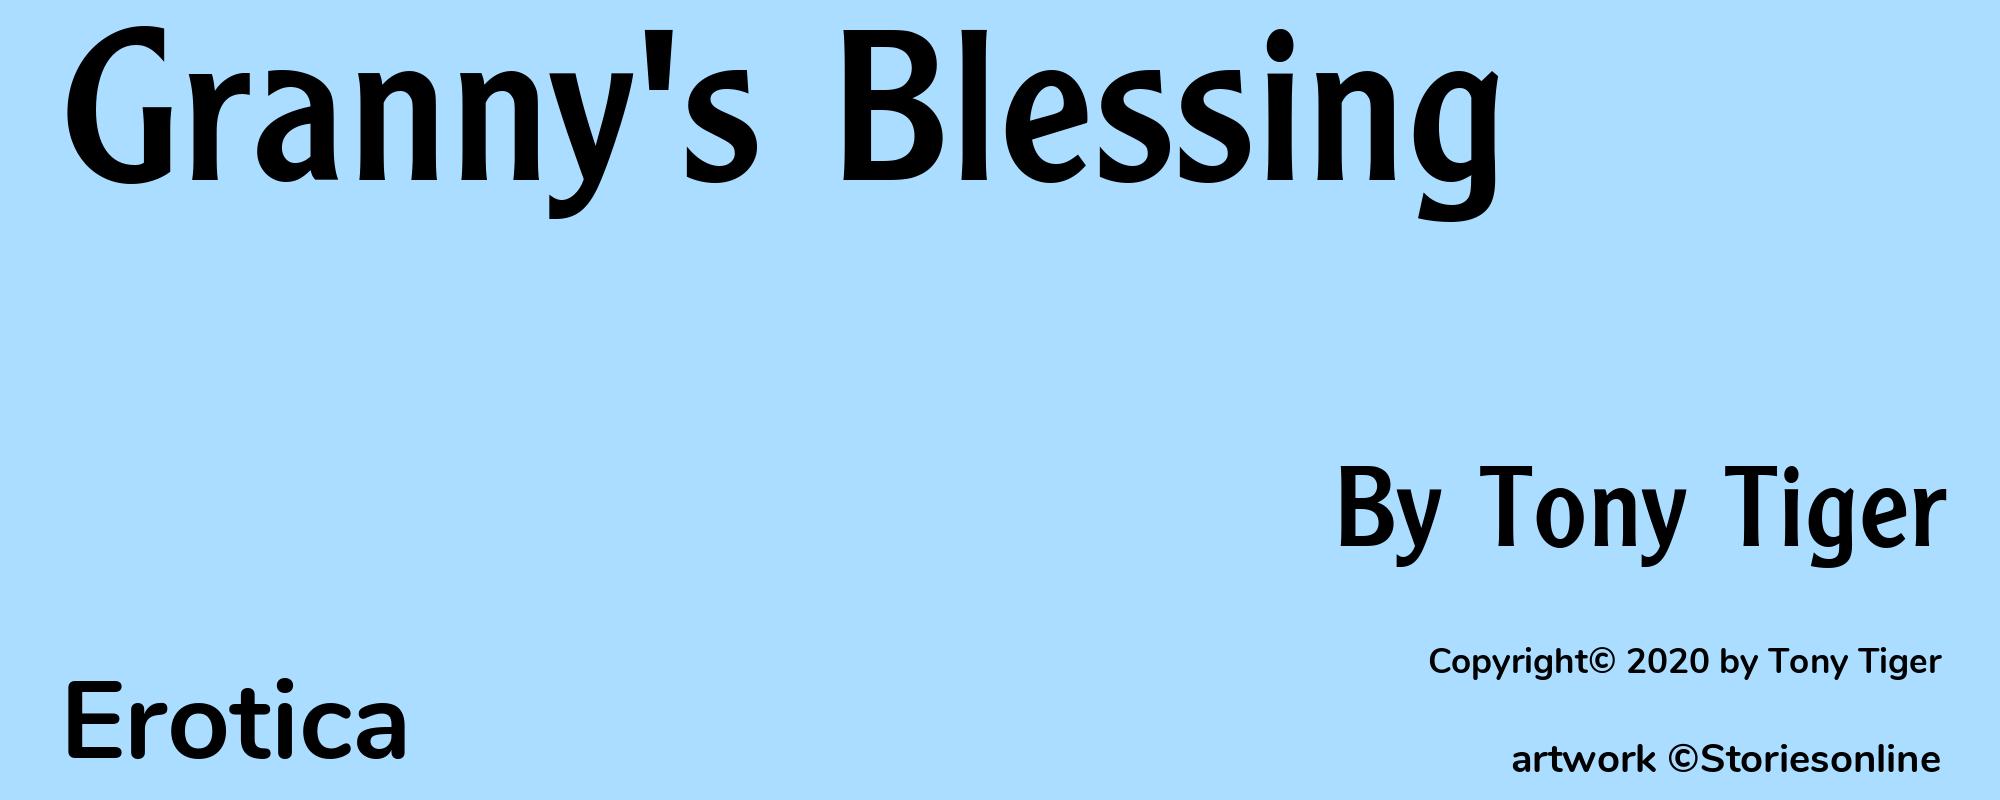 Granny's Blessing - Cover